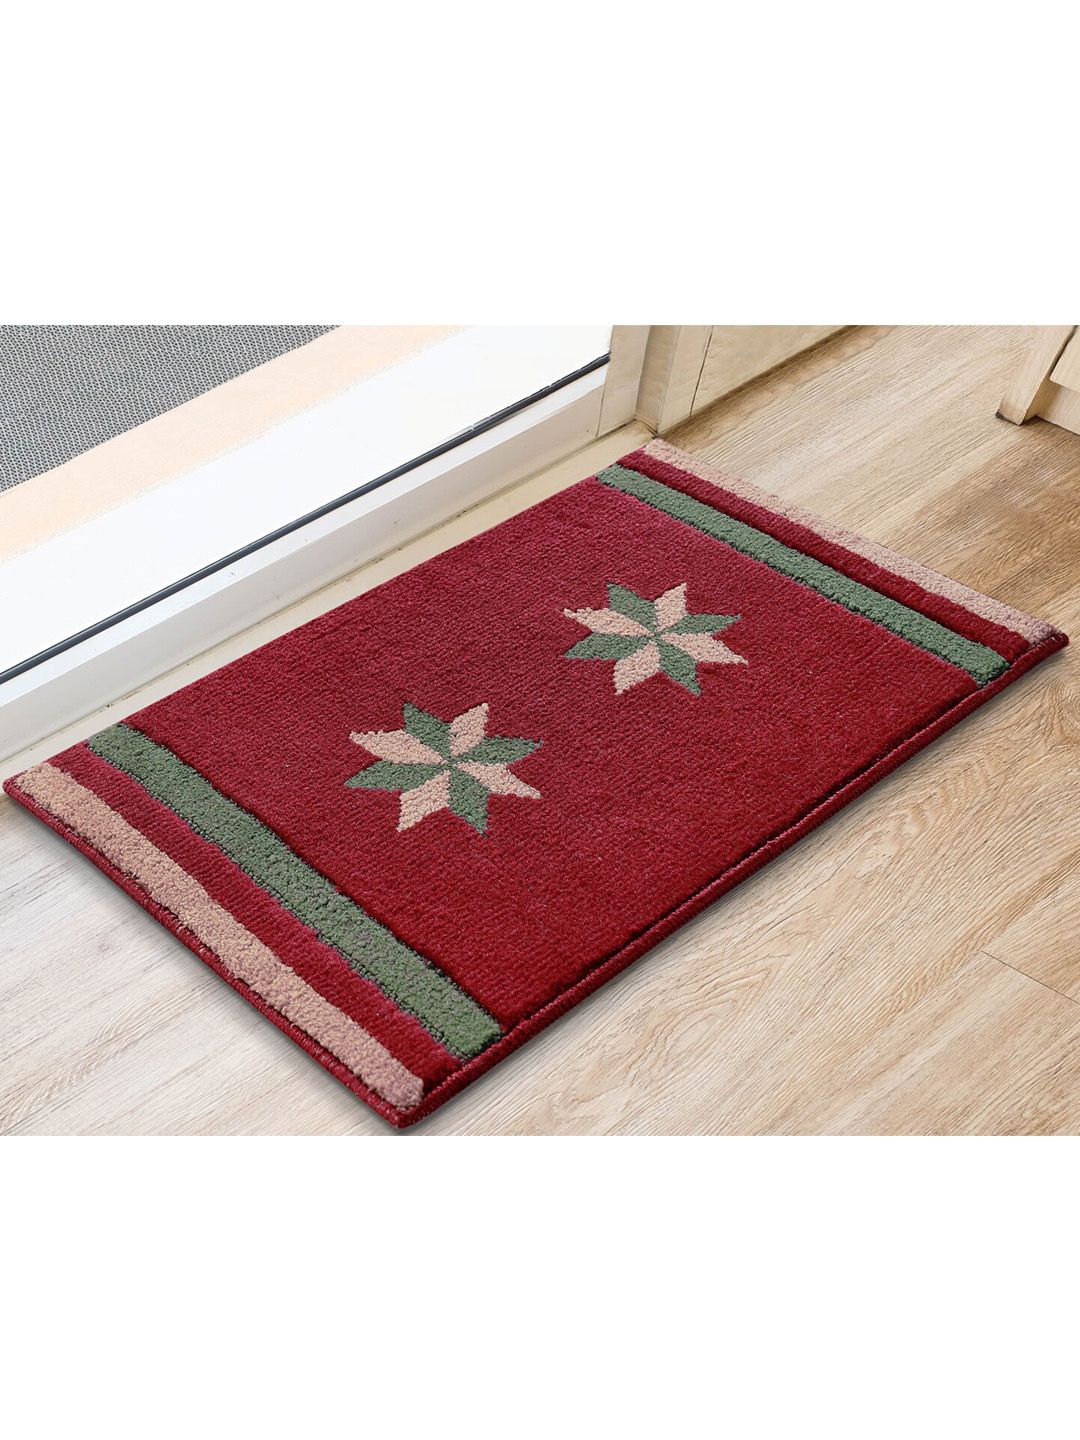 Saral Home Maroon & Green Patterned Cotton Anti-Skid Door Mat Price in India